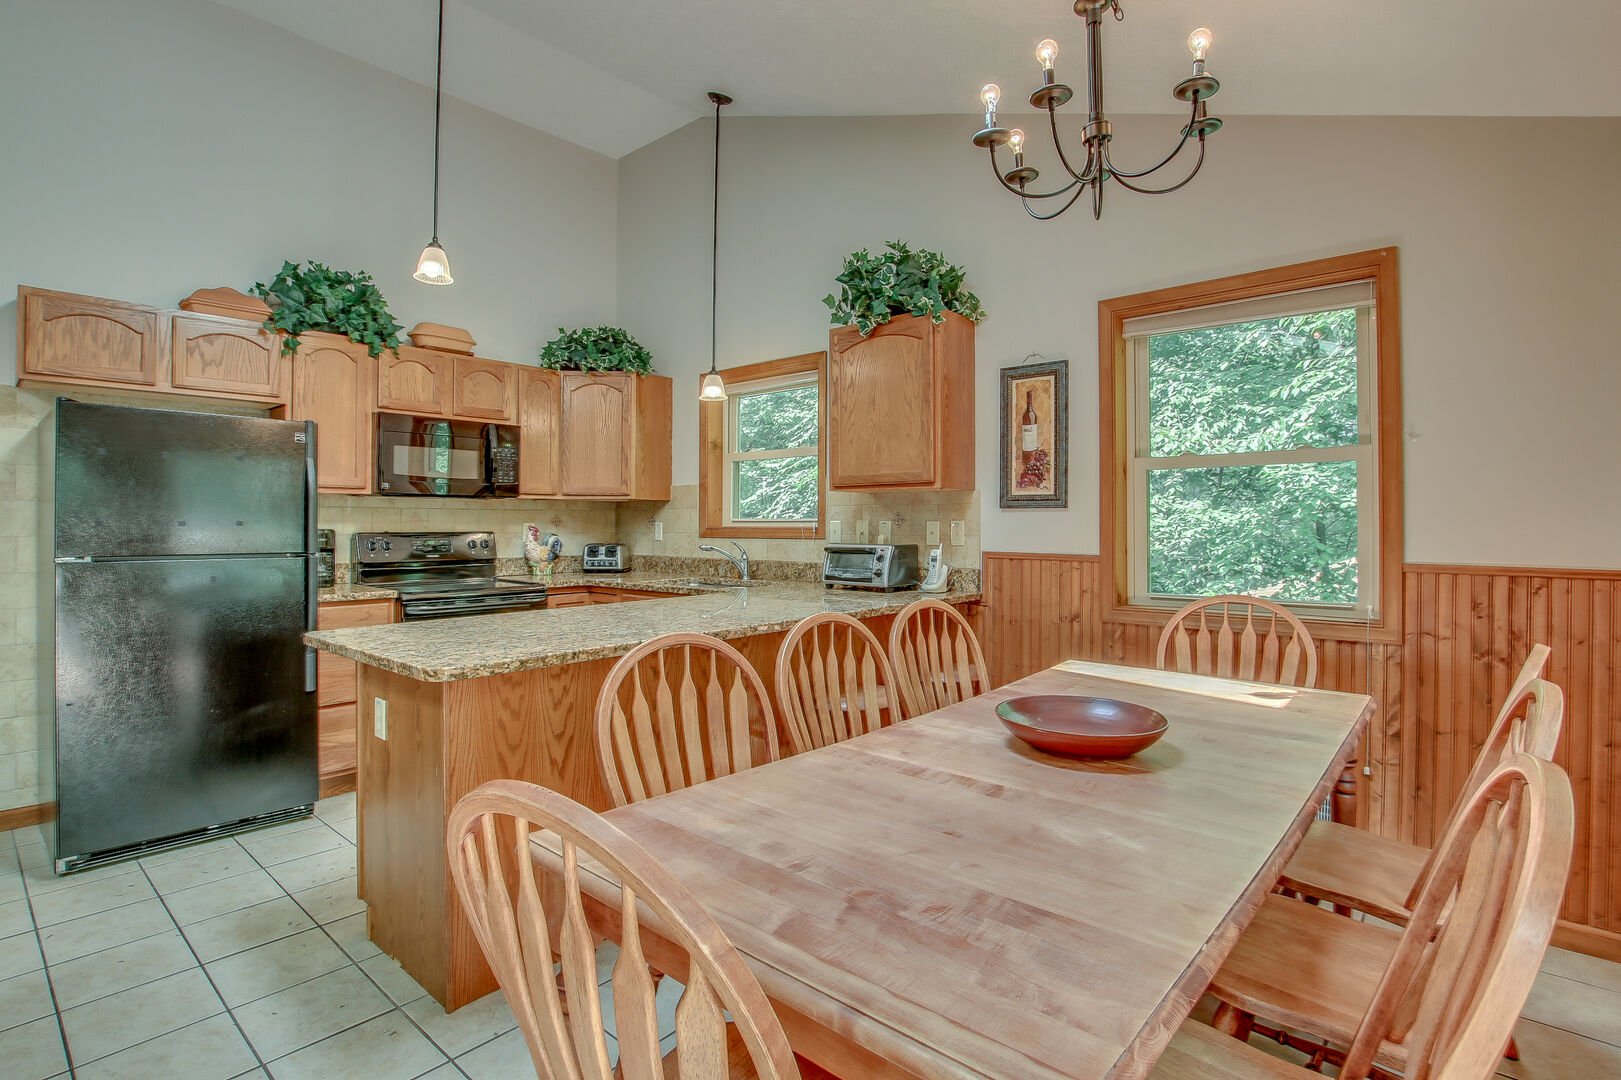 Picture of the table and chairs, refrigerator, microwave, and oven in the kitchen of this Lake Harmony rental.